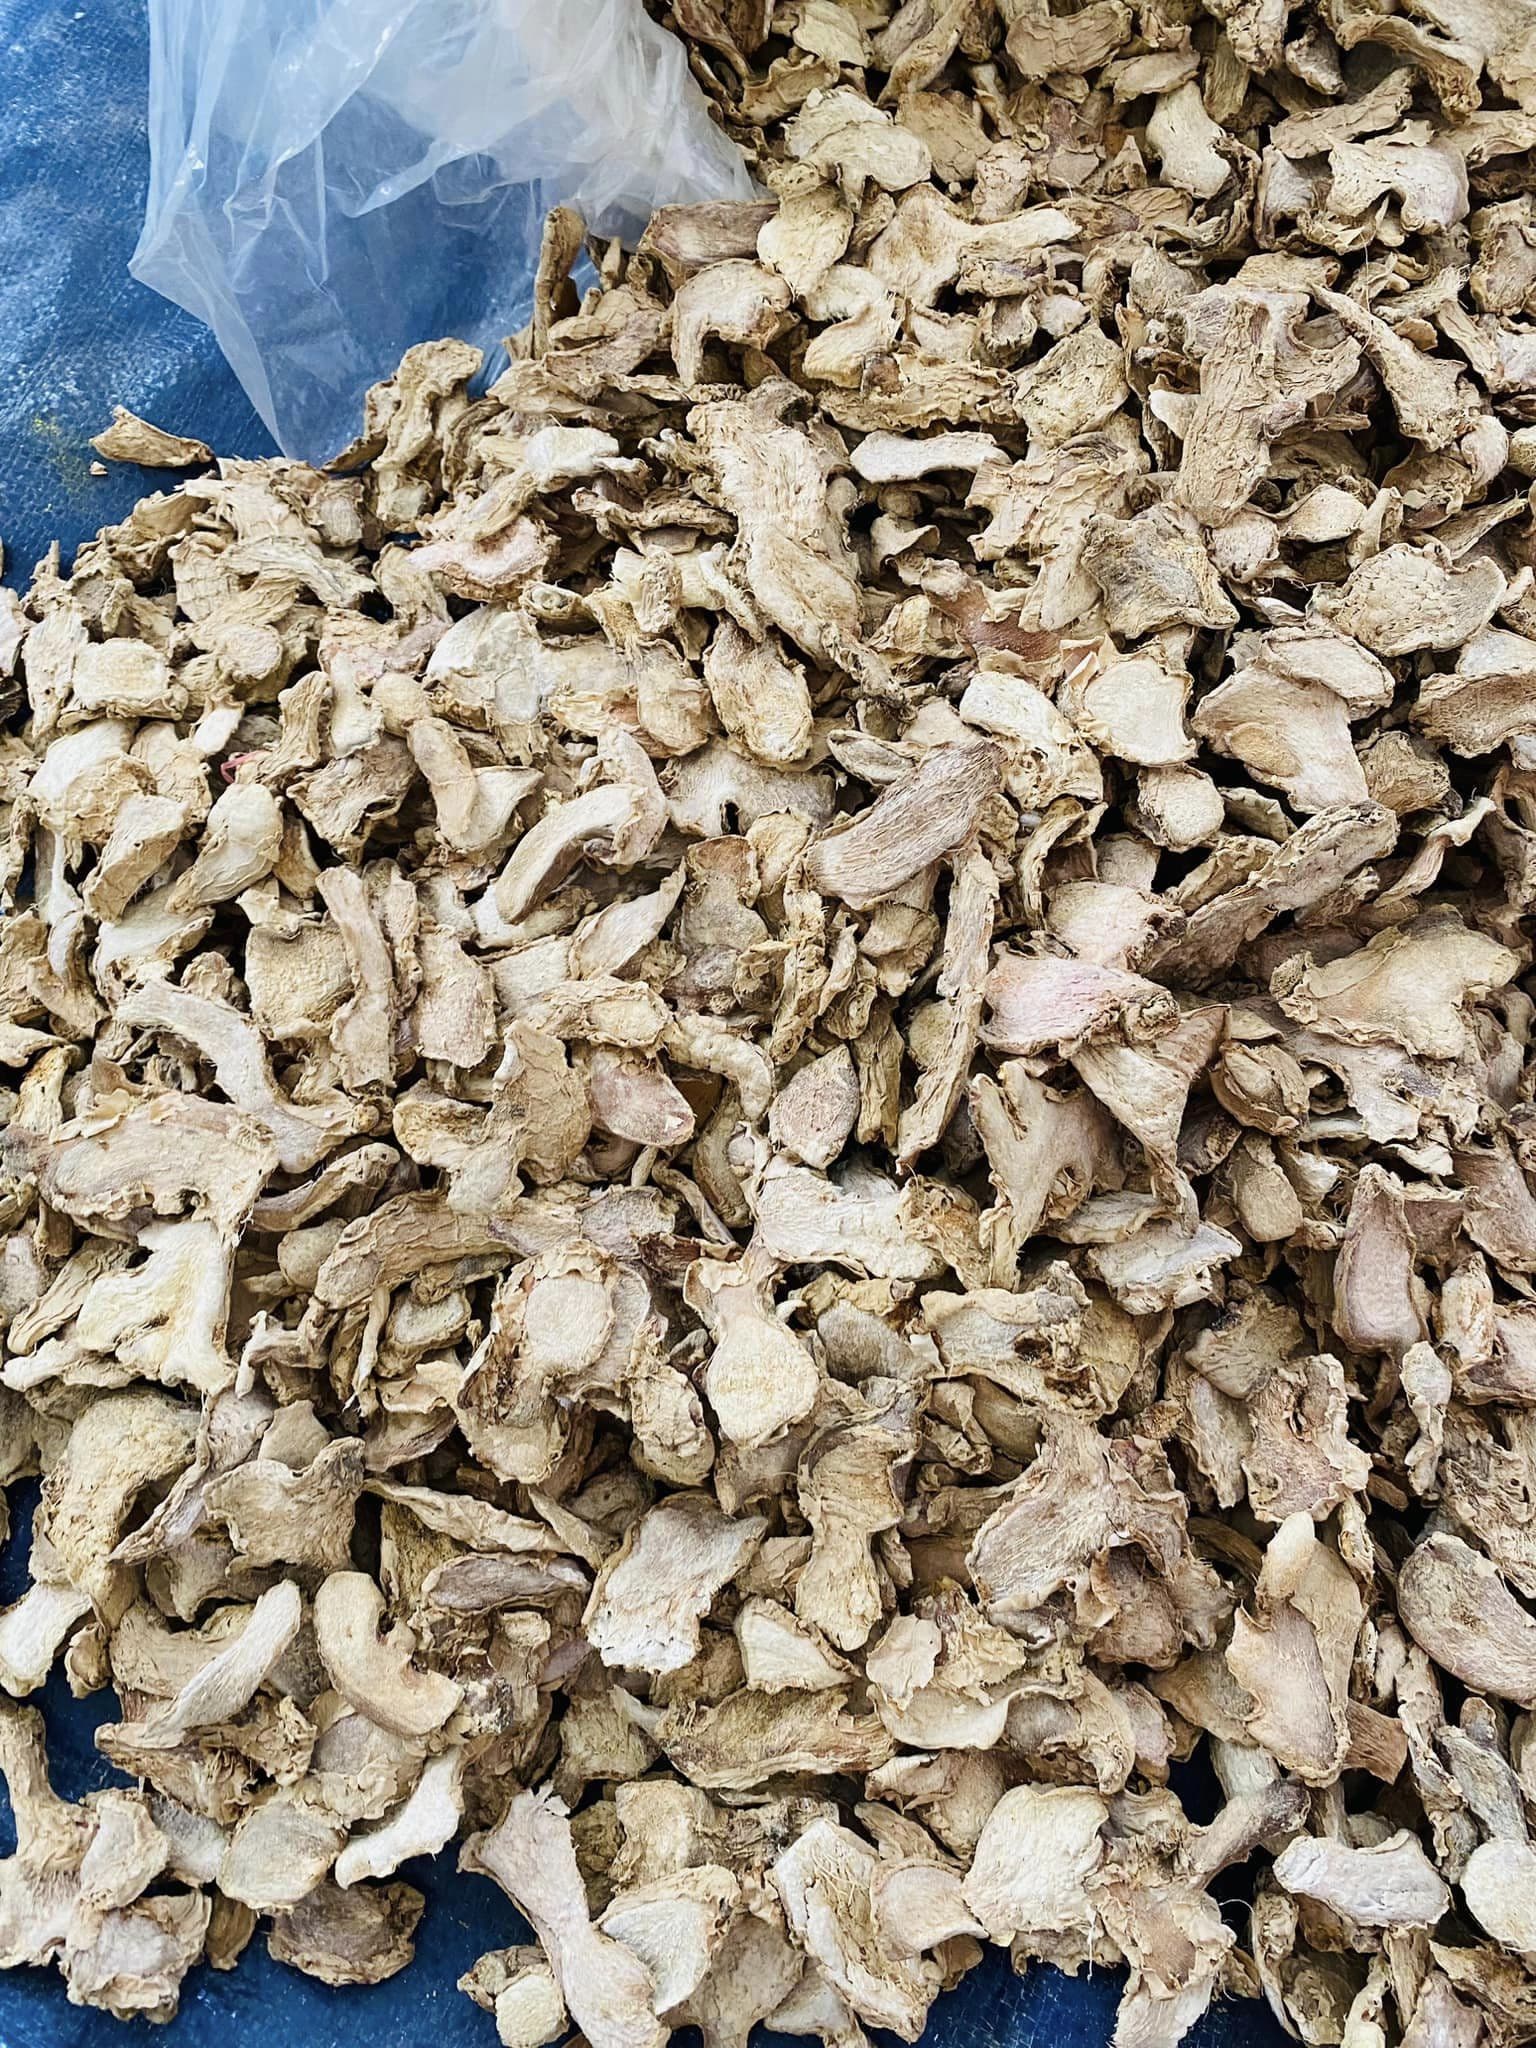 Organic dried ginger root sliced food grade wholesales cheap price from Vietnam manufacturer